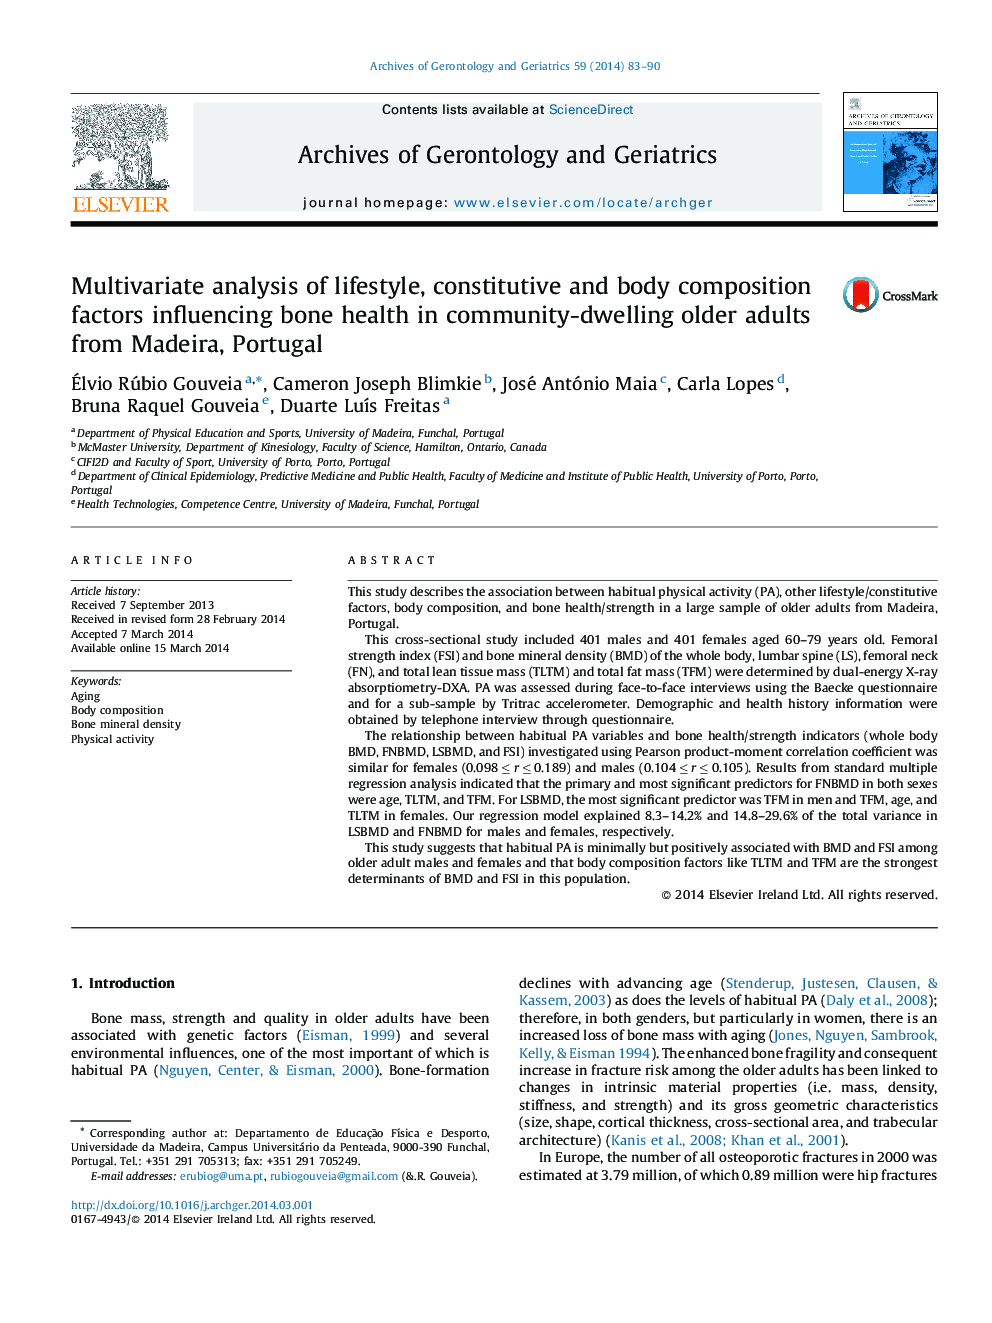 Multivariate analysis of lifestyle, constitutive and body composition factors influencing bone health in community-dwelling older adults from Madeira, Portugal